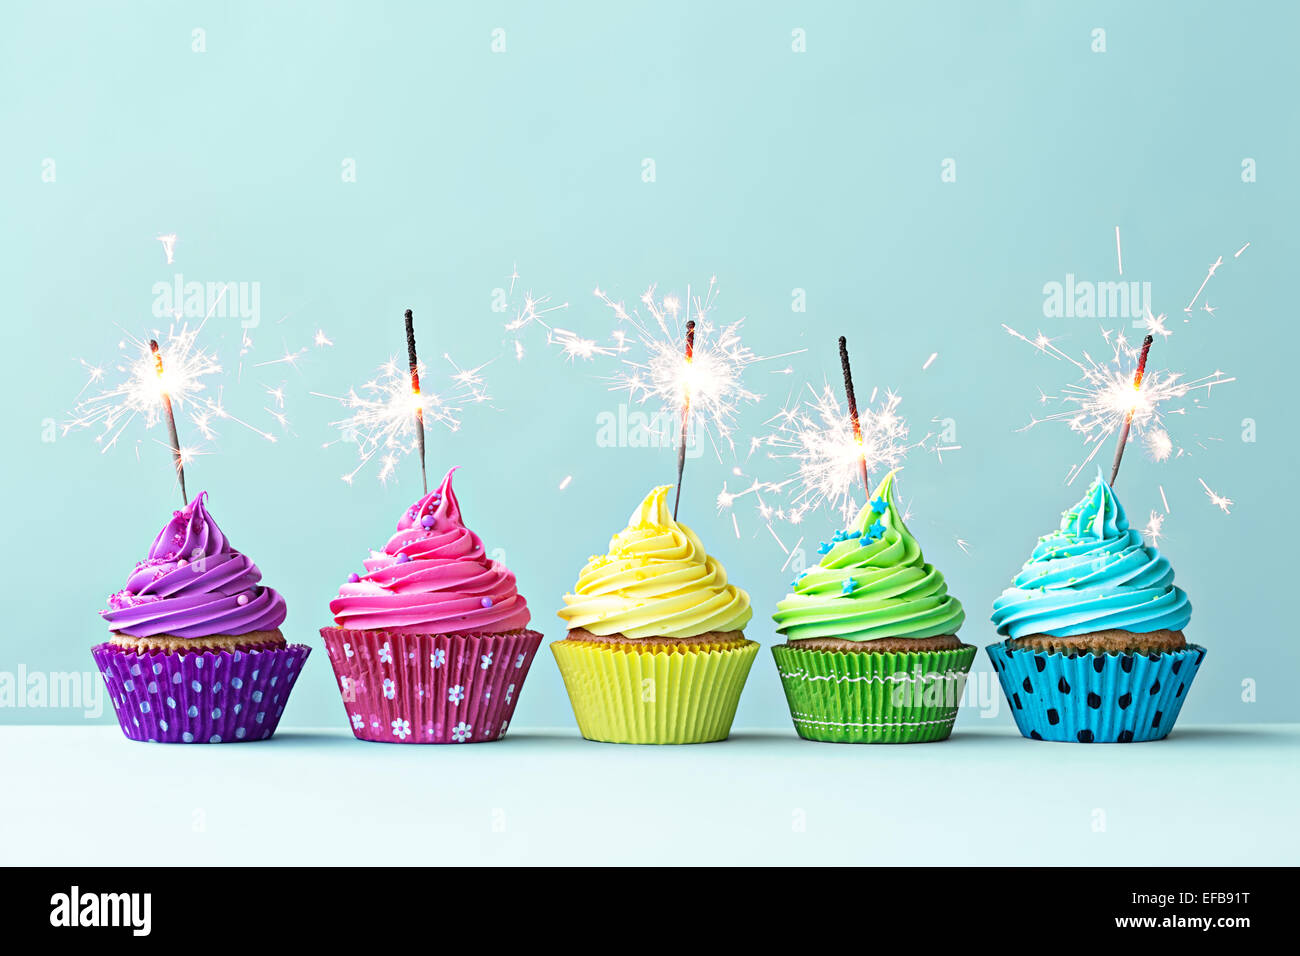 Row of colorful cupcakes with sparklers Stock Photo